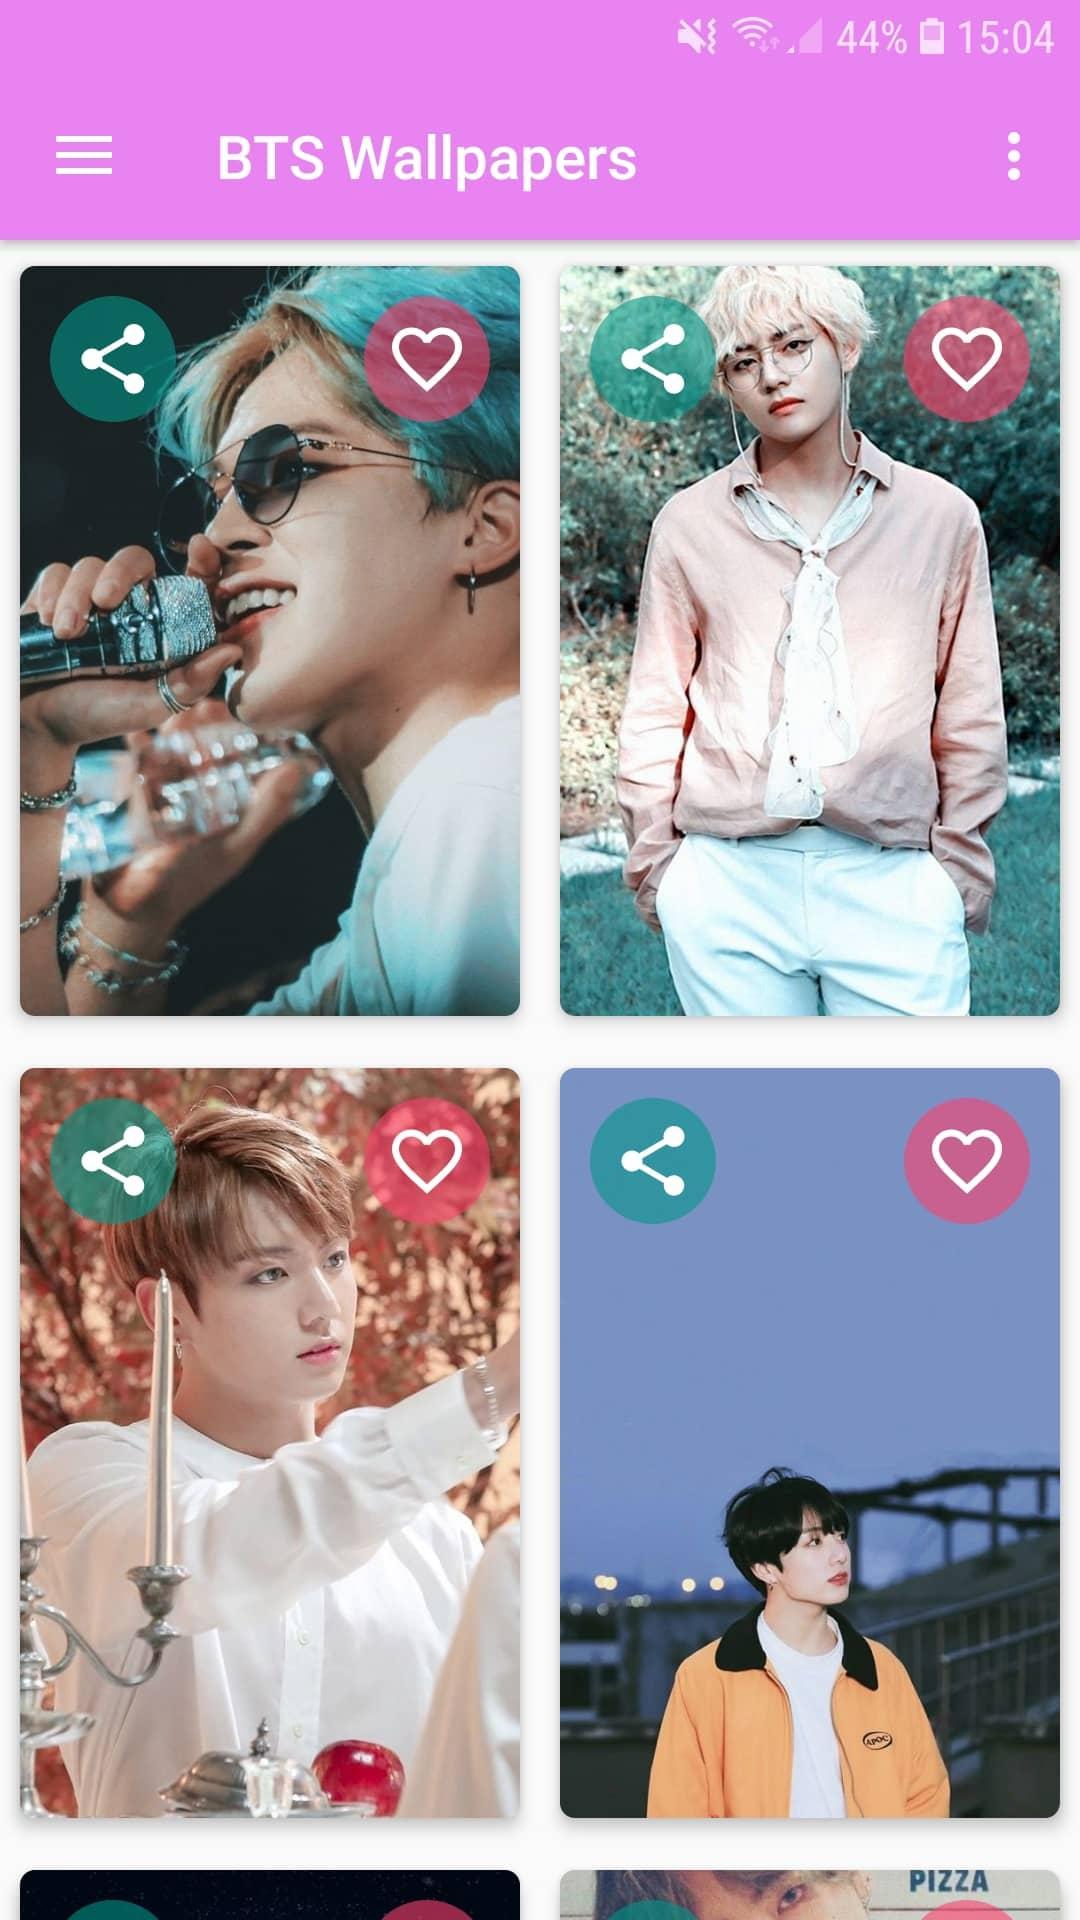 New Bts Wallpapers Kpop Wallpaper Hd 2019 For Android Apk Download